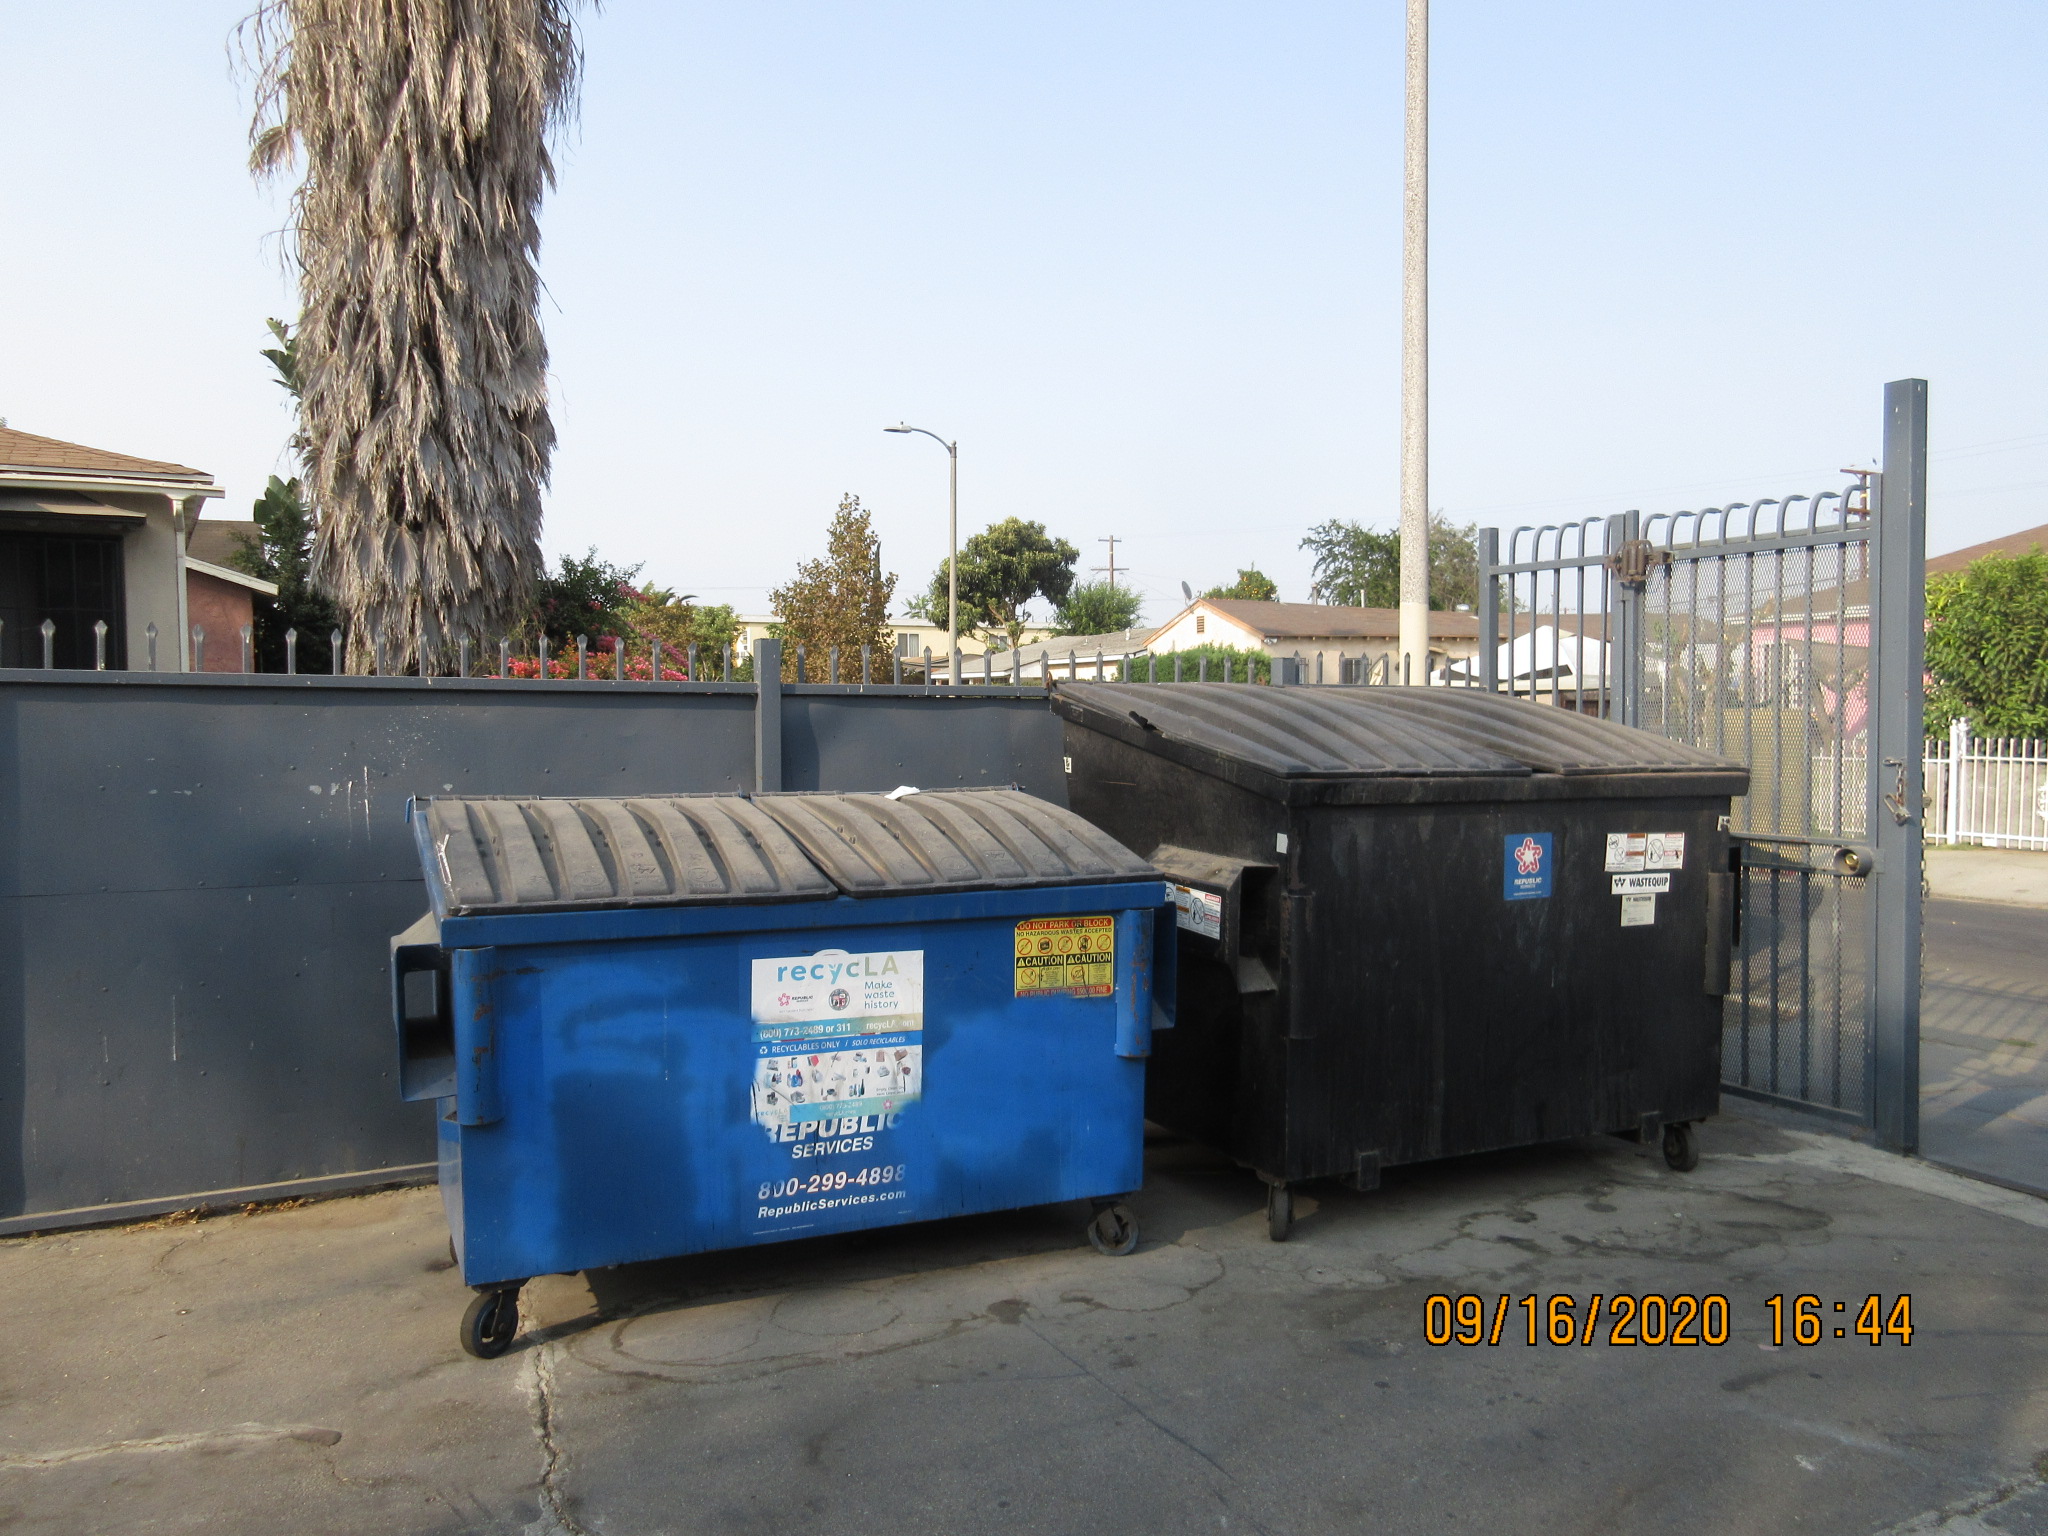 lexington a & b apartments dumpster area. Large waste dumpster and large recycling bin